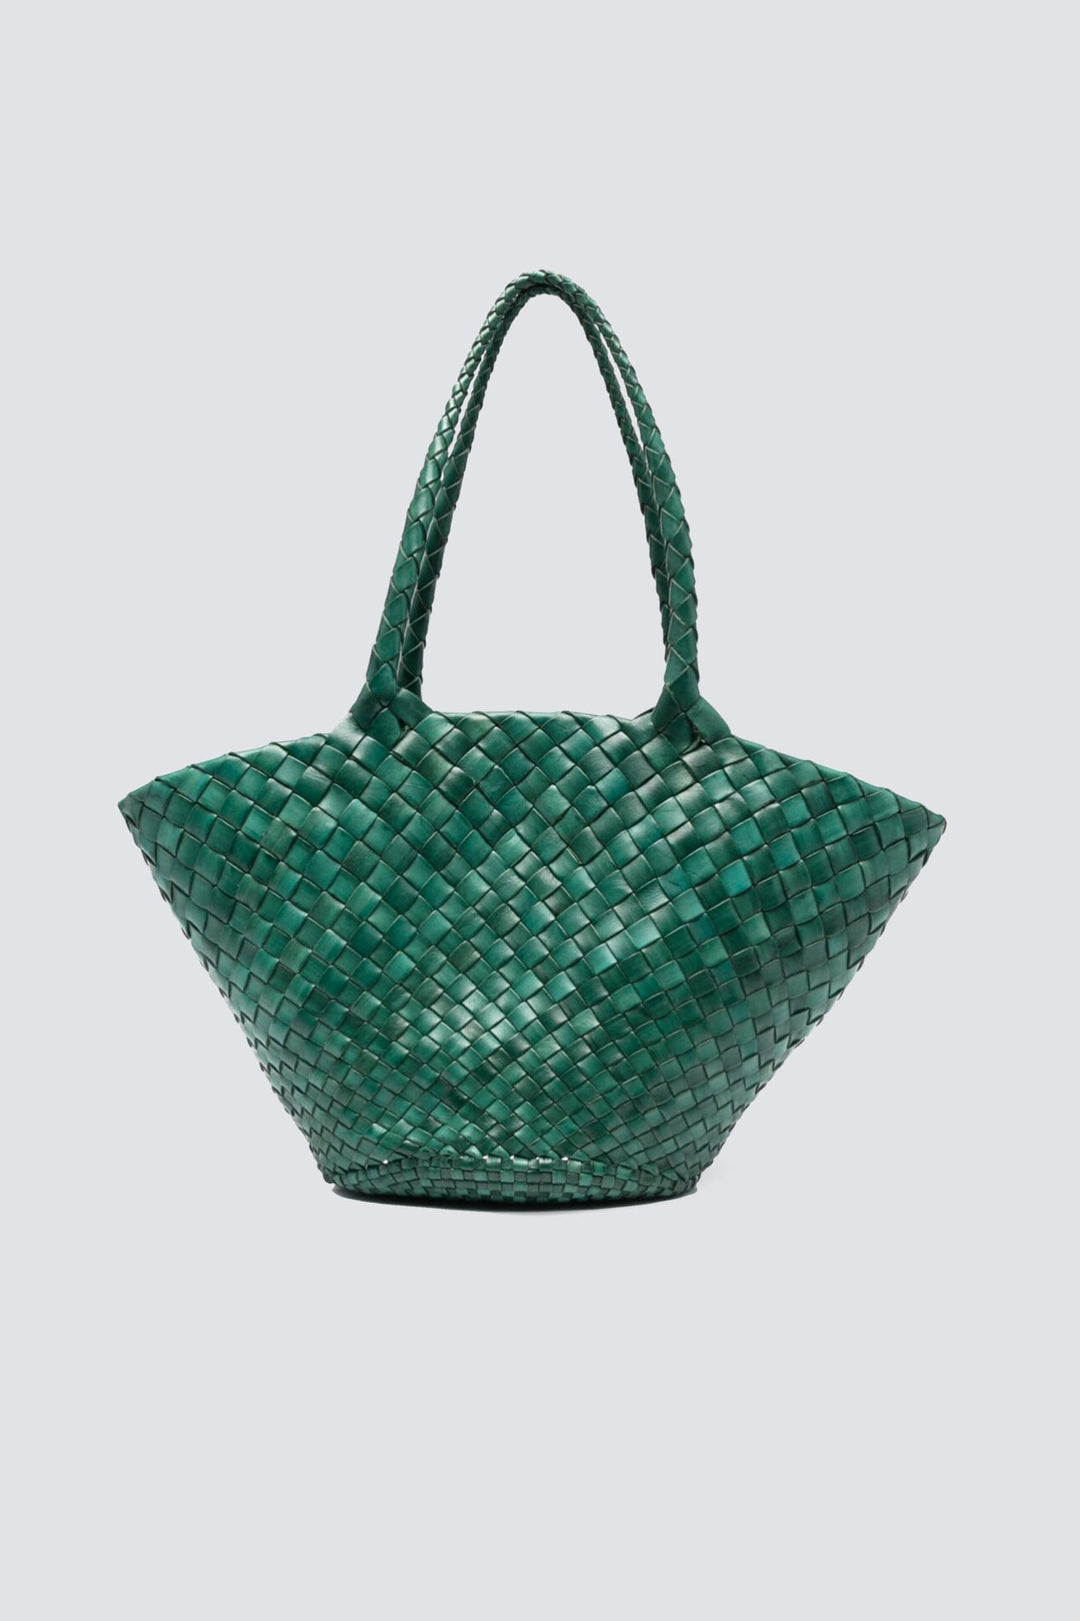 Dragon Diffusion Leather Bag Handmade - Egola Tote Forest Green